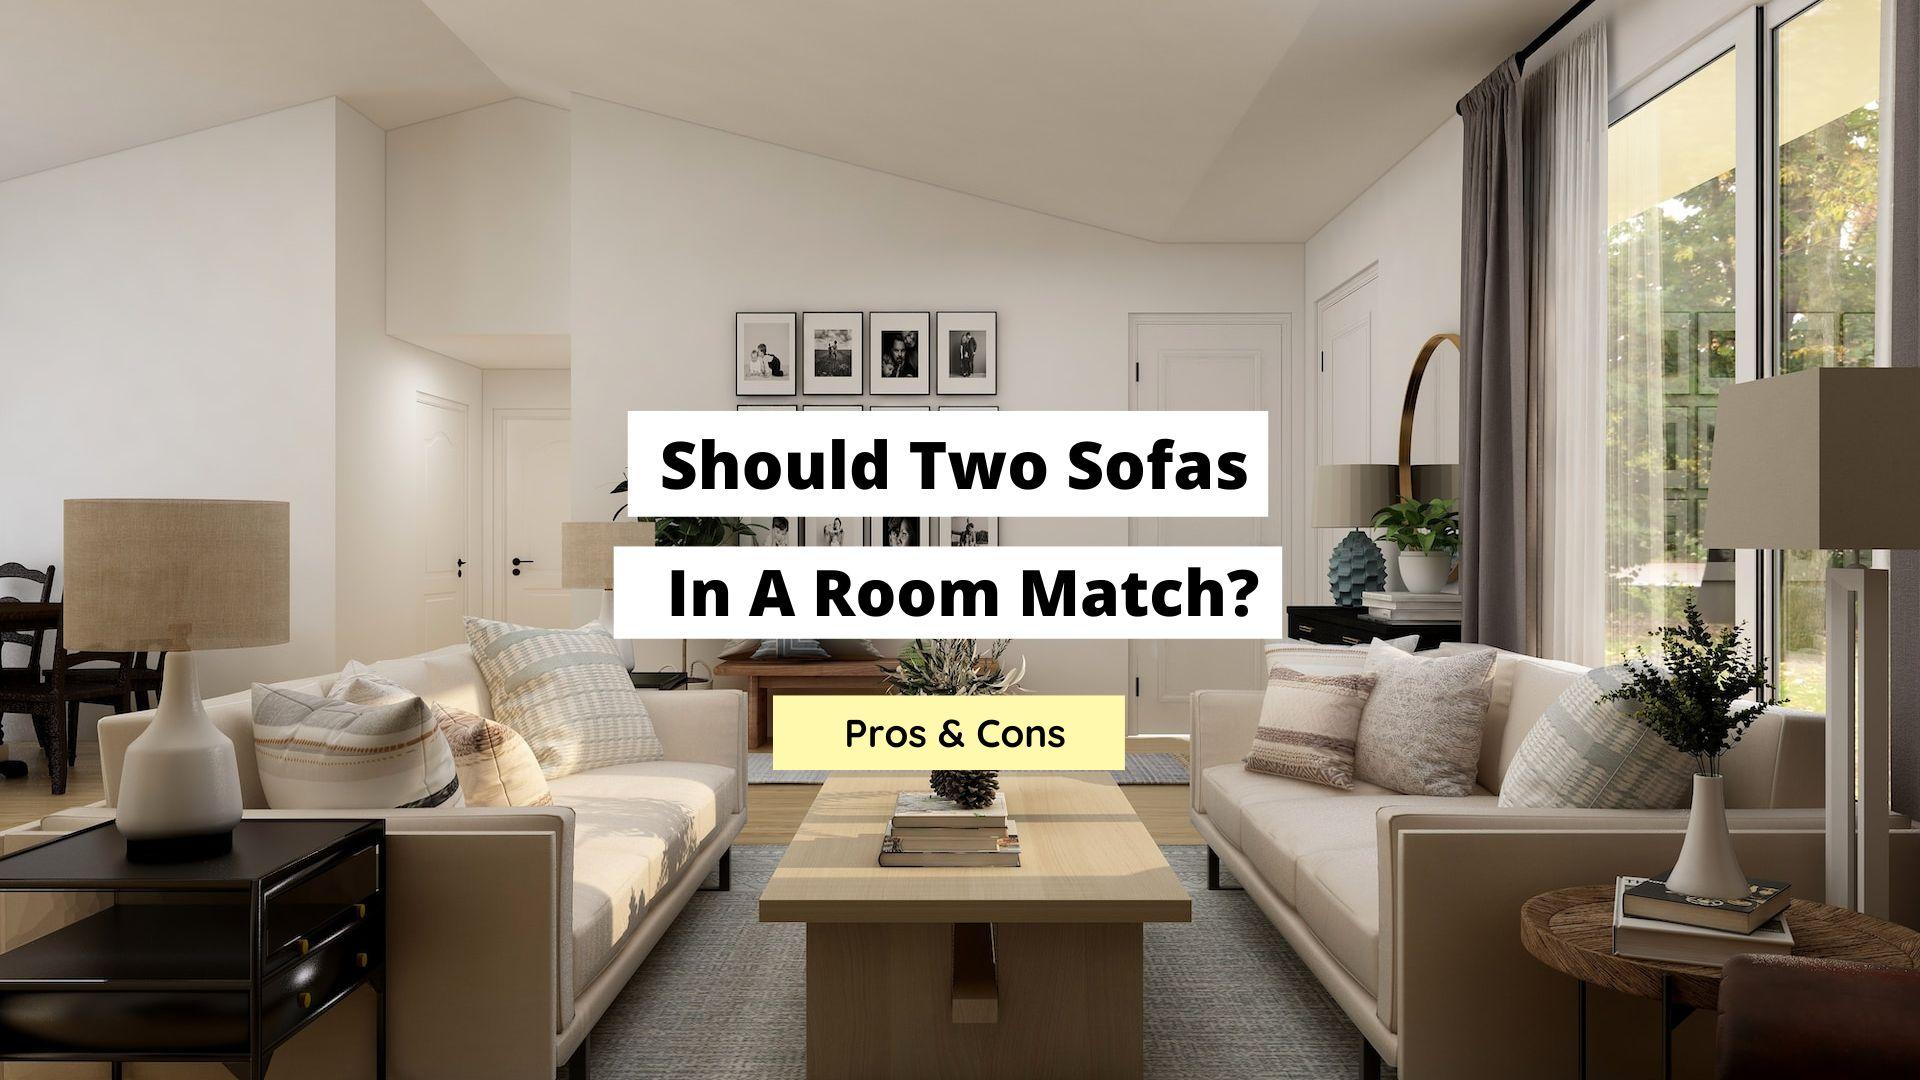 Should Two Sofas in a Room Match